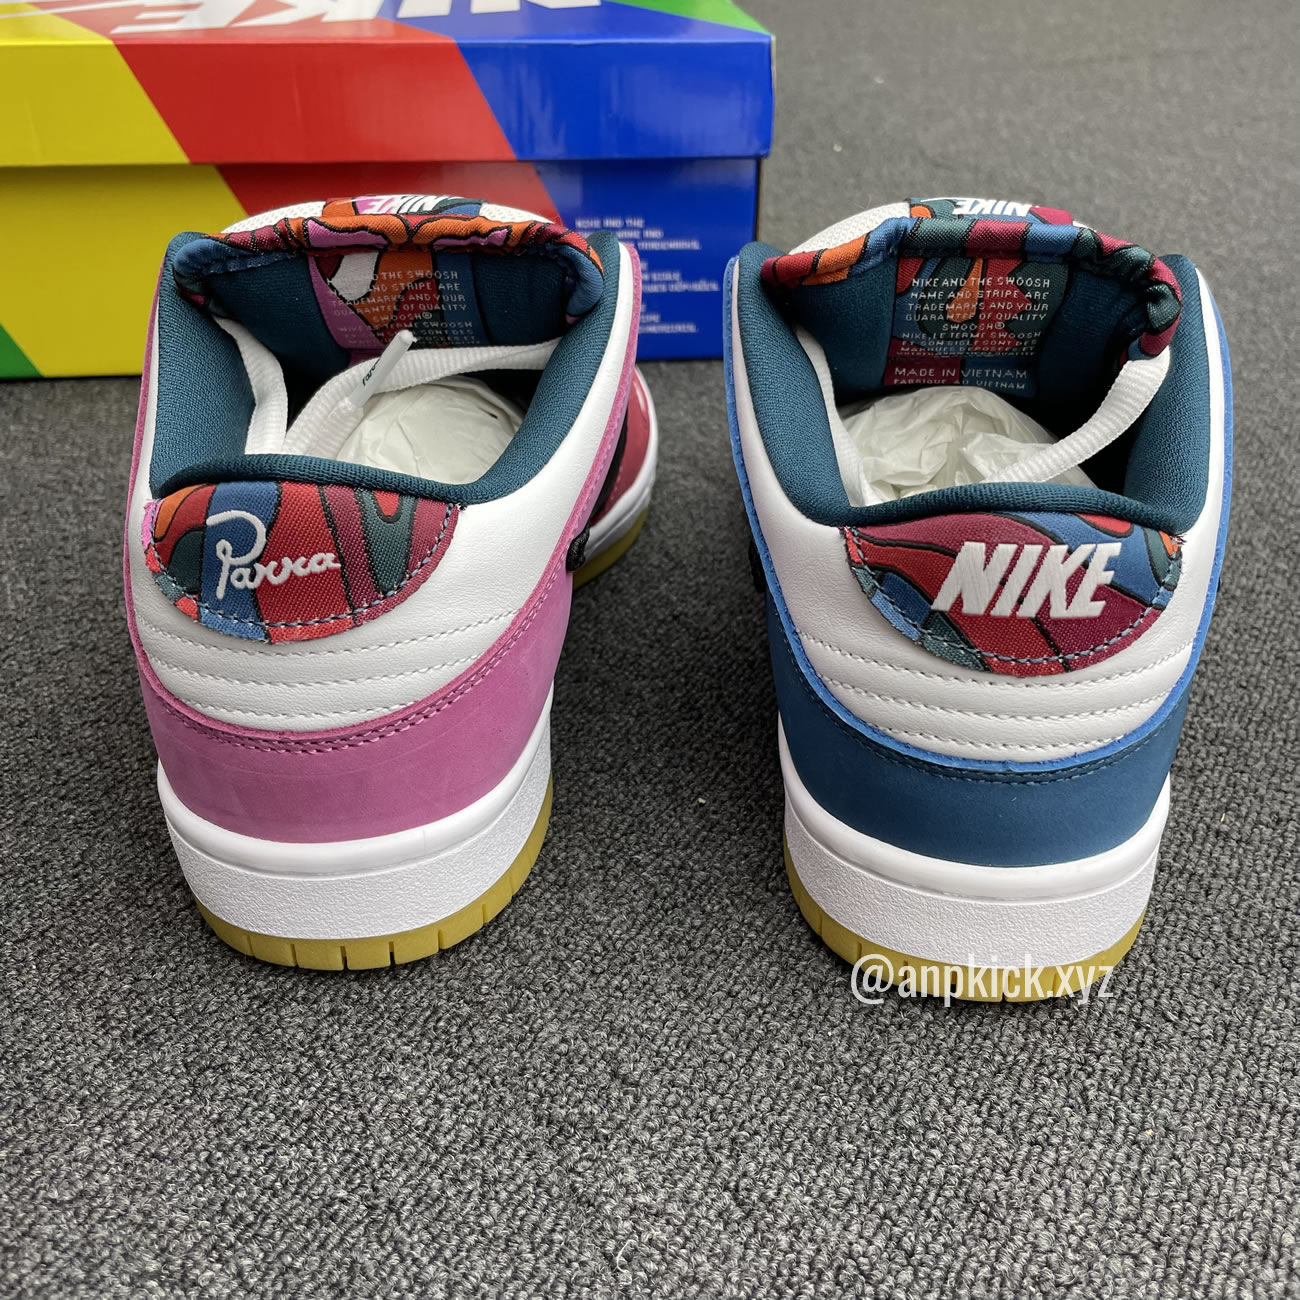 Parra Nike Sb Dunk Low Collab Summer 2021 Colorway Surfaces Dh7695 100 (8) - newkick.org